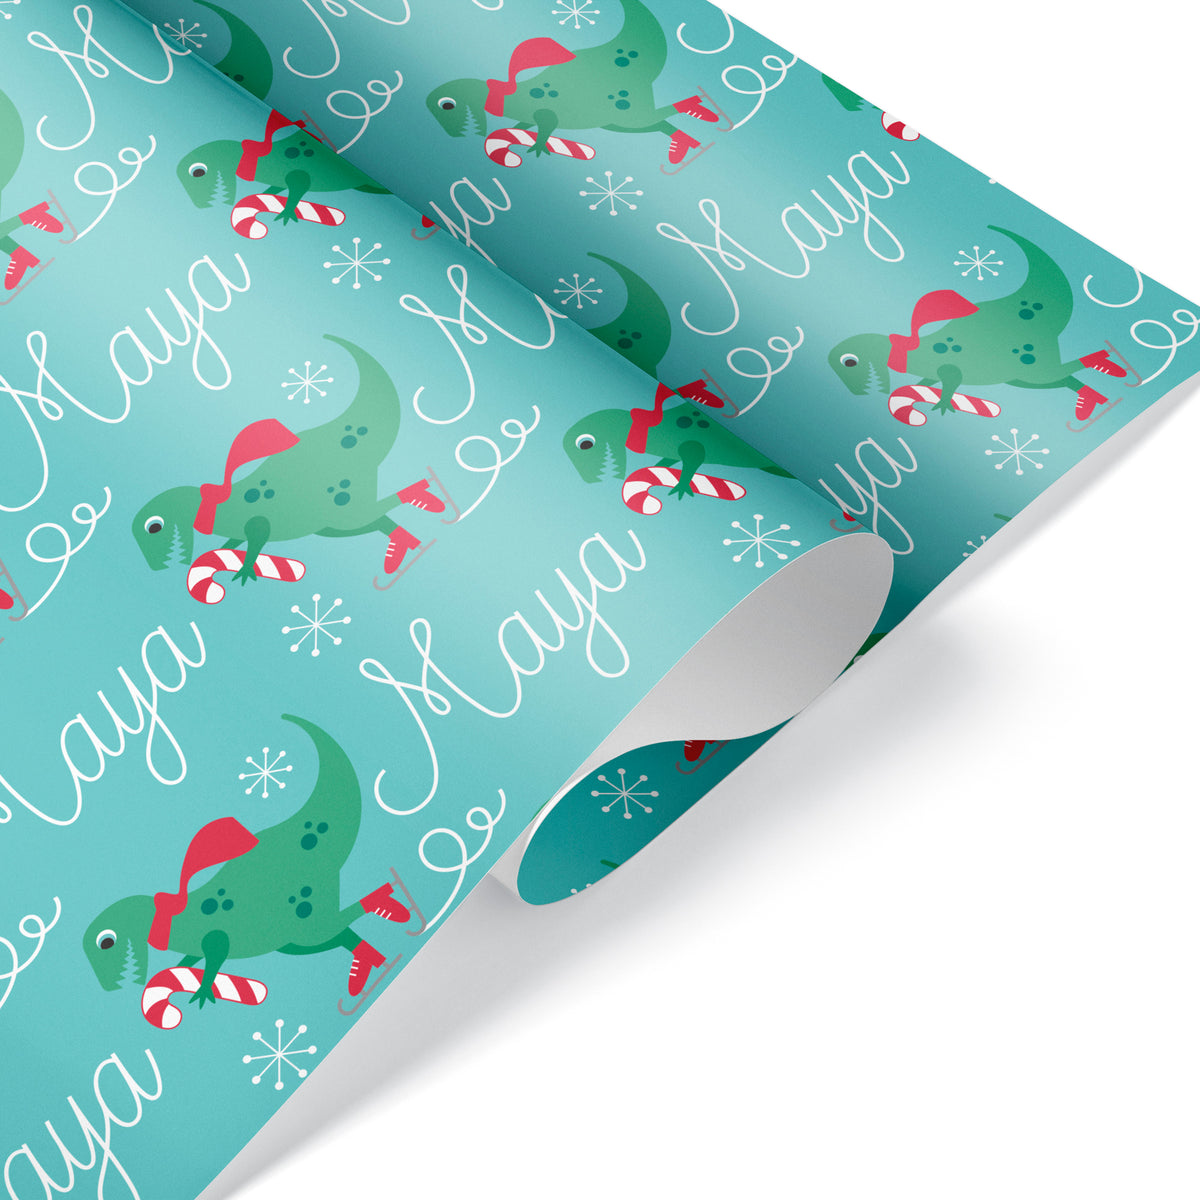 T-Rex Ice Skating Christmas Personalized Wrapping Paper - ROBIN